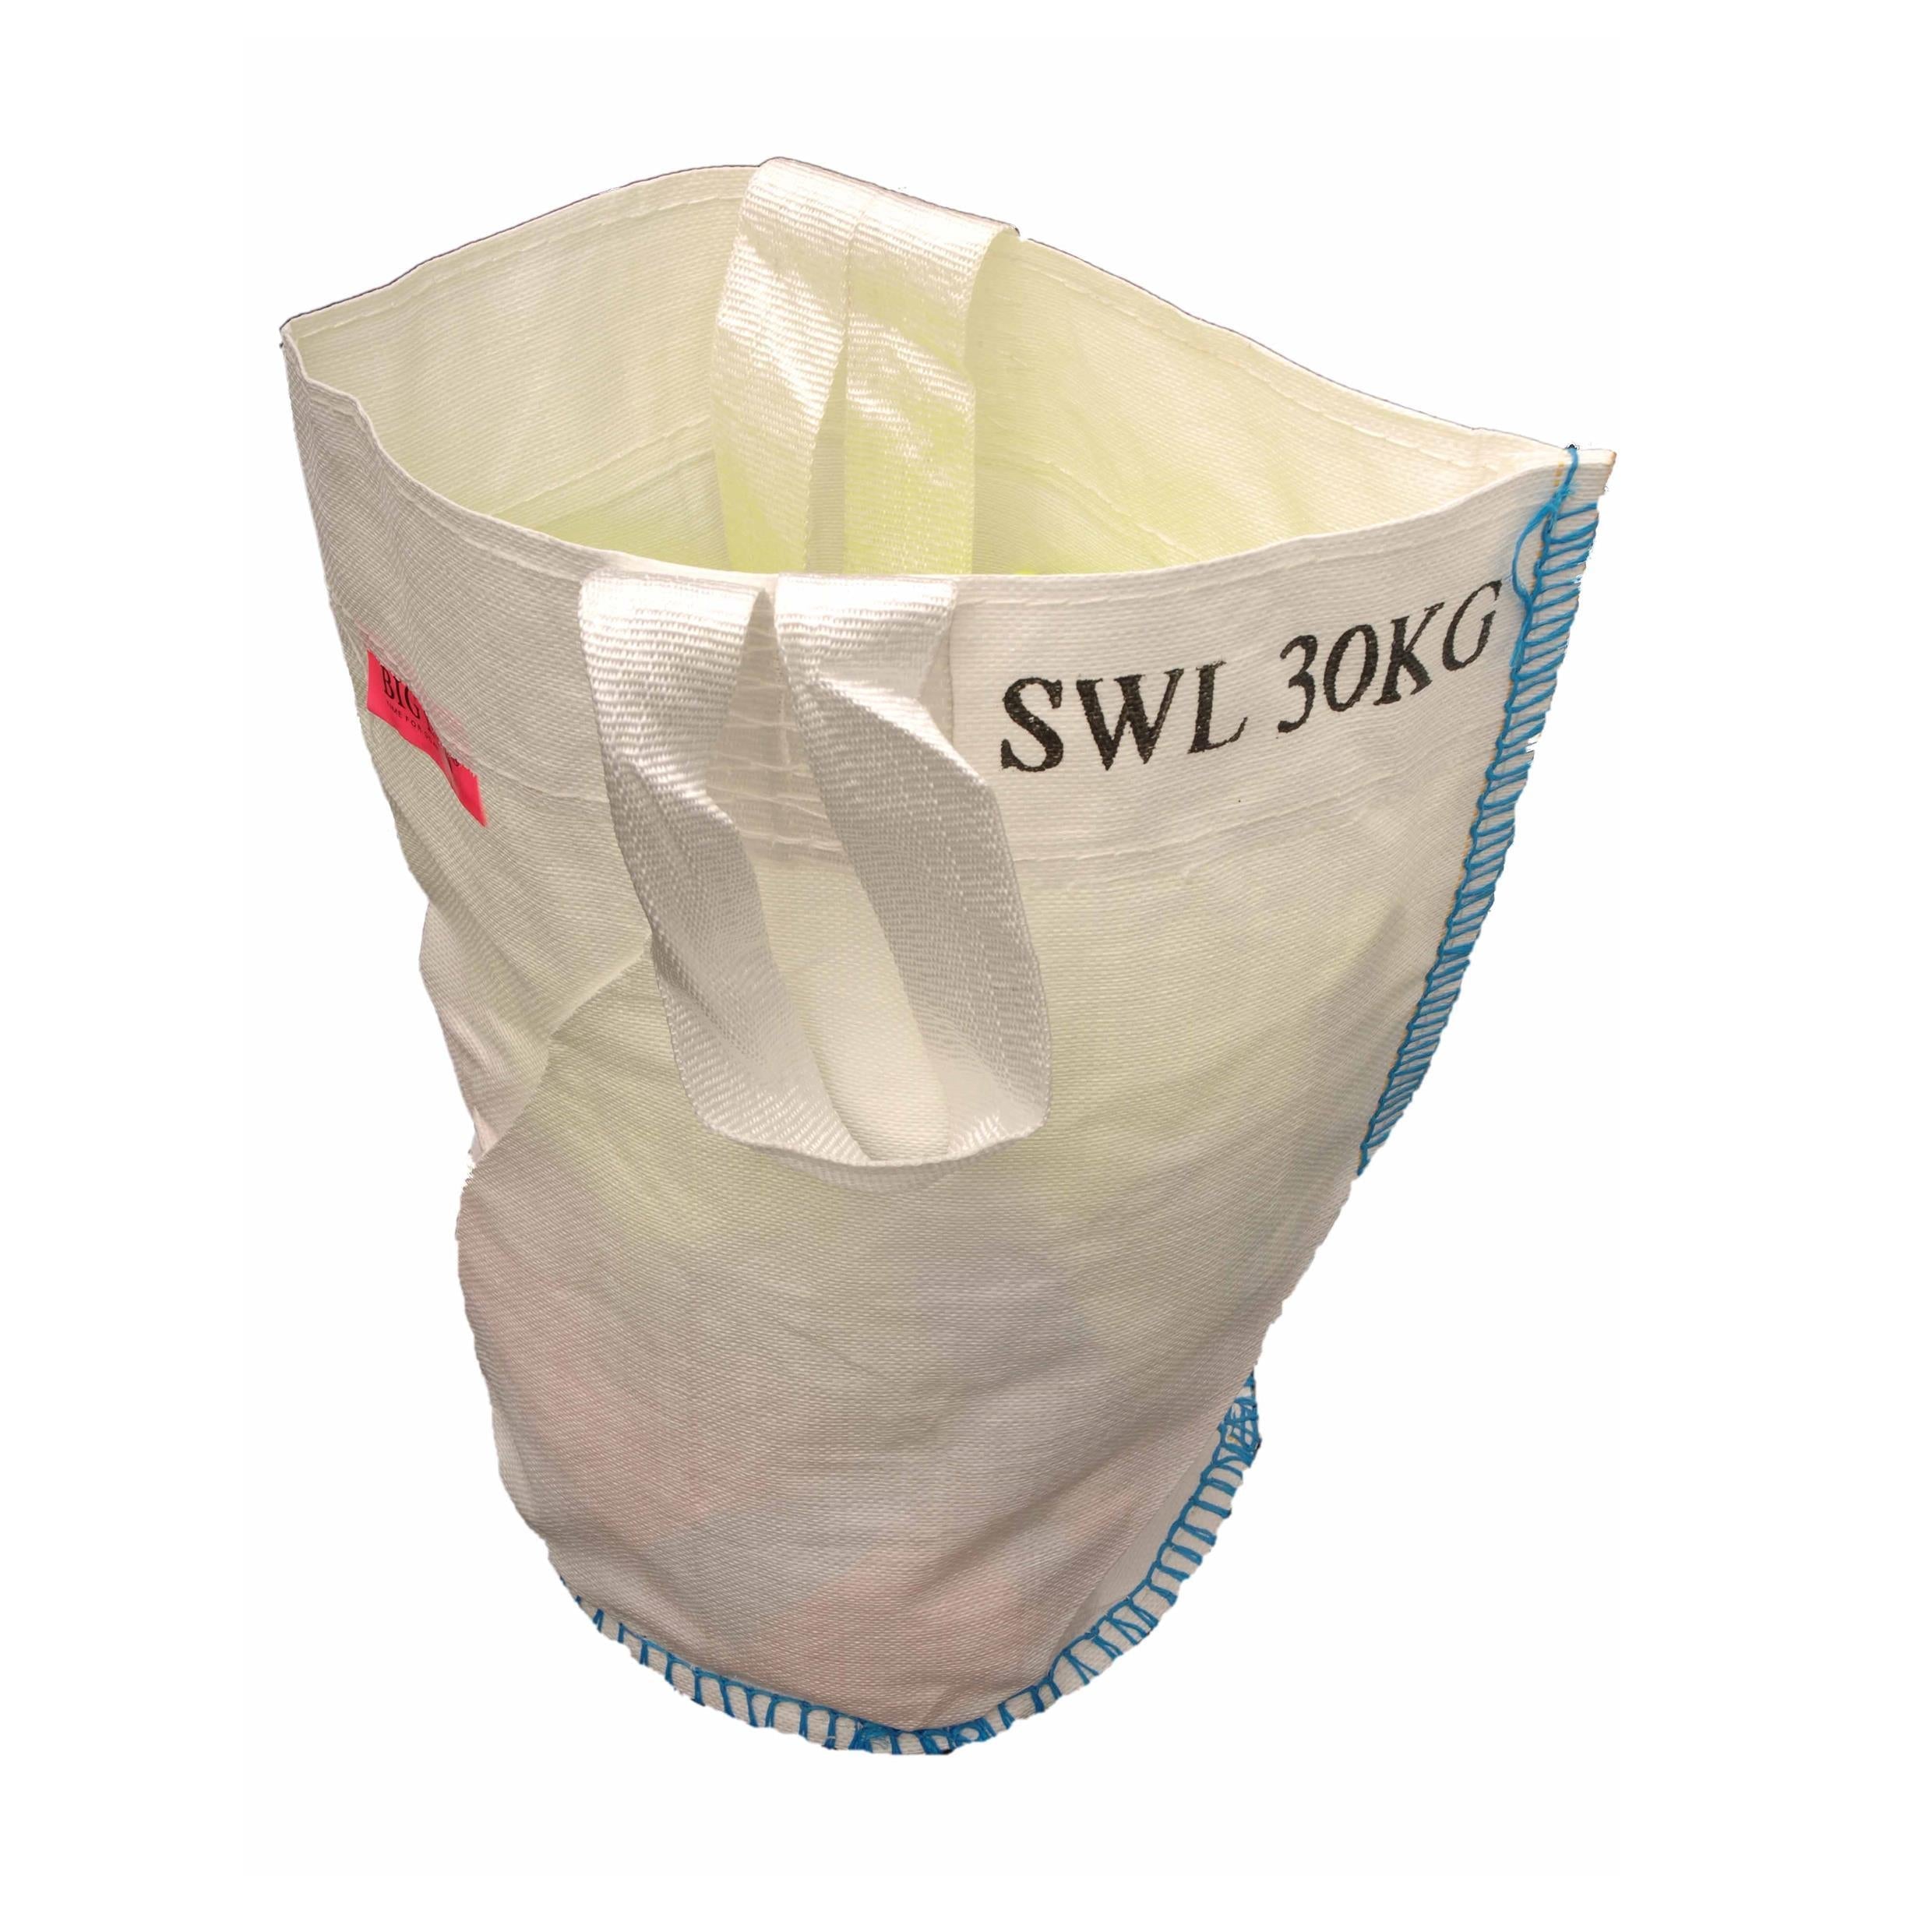 Lifting Bags For Construction